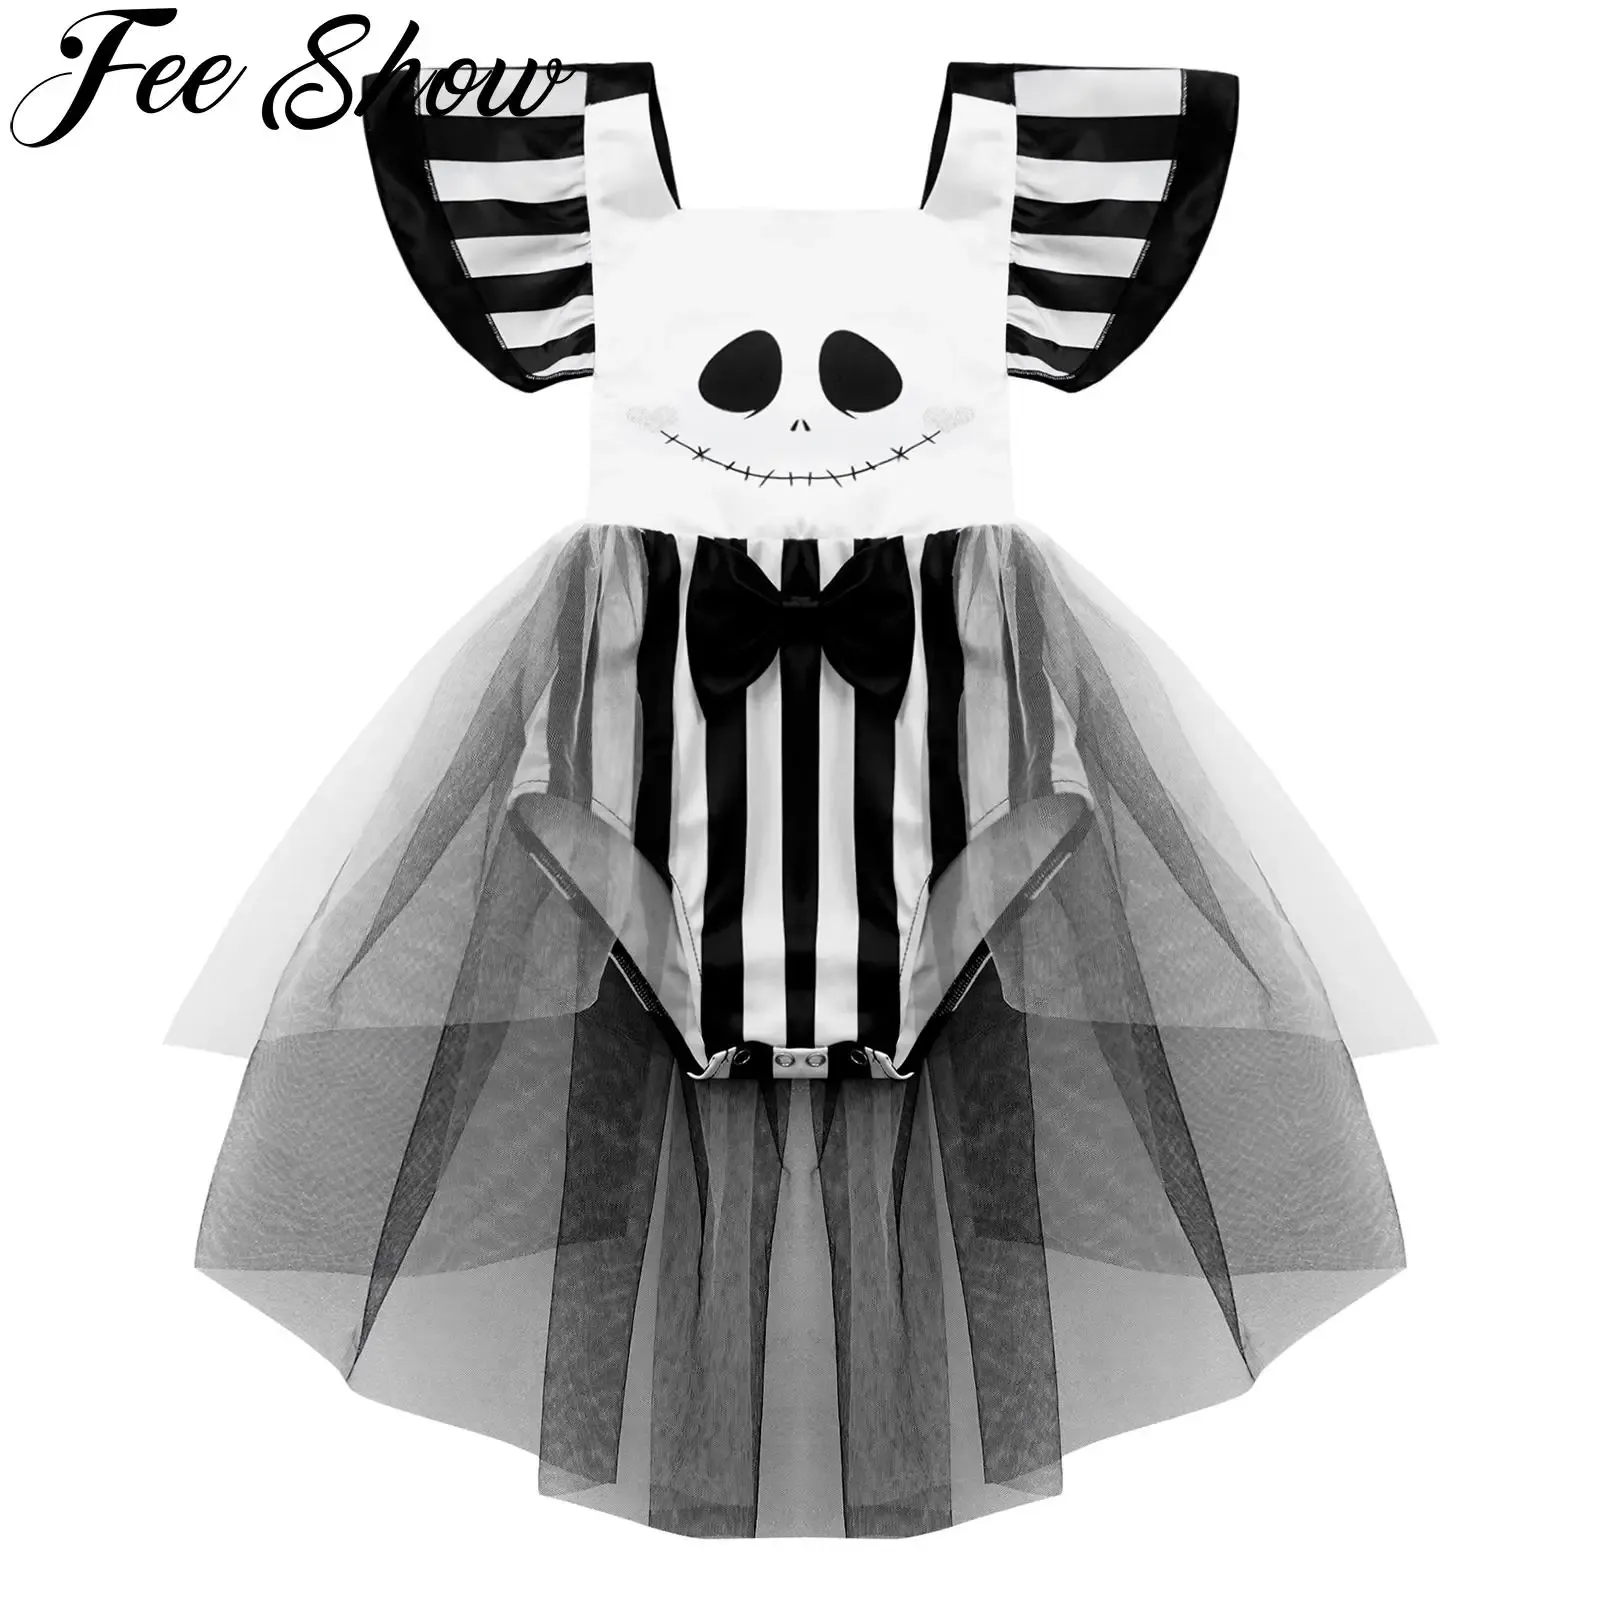 One-Pieces Infant Baby Girls Ghost Costume Flutter Sleeves Skull Face Printed Mesh Romper Dress for Halloween Party Cosplay Party Clothes